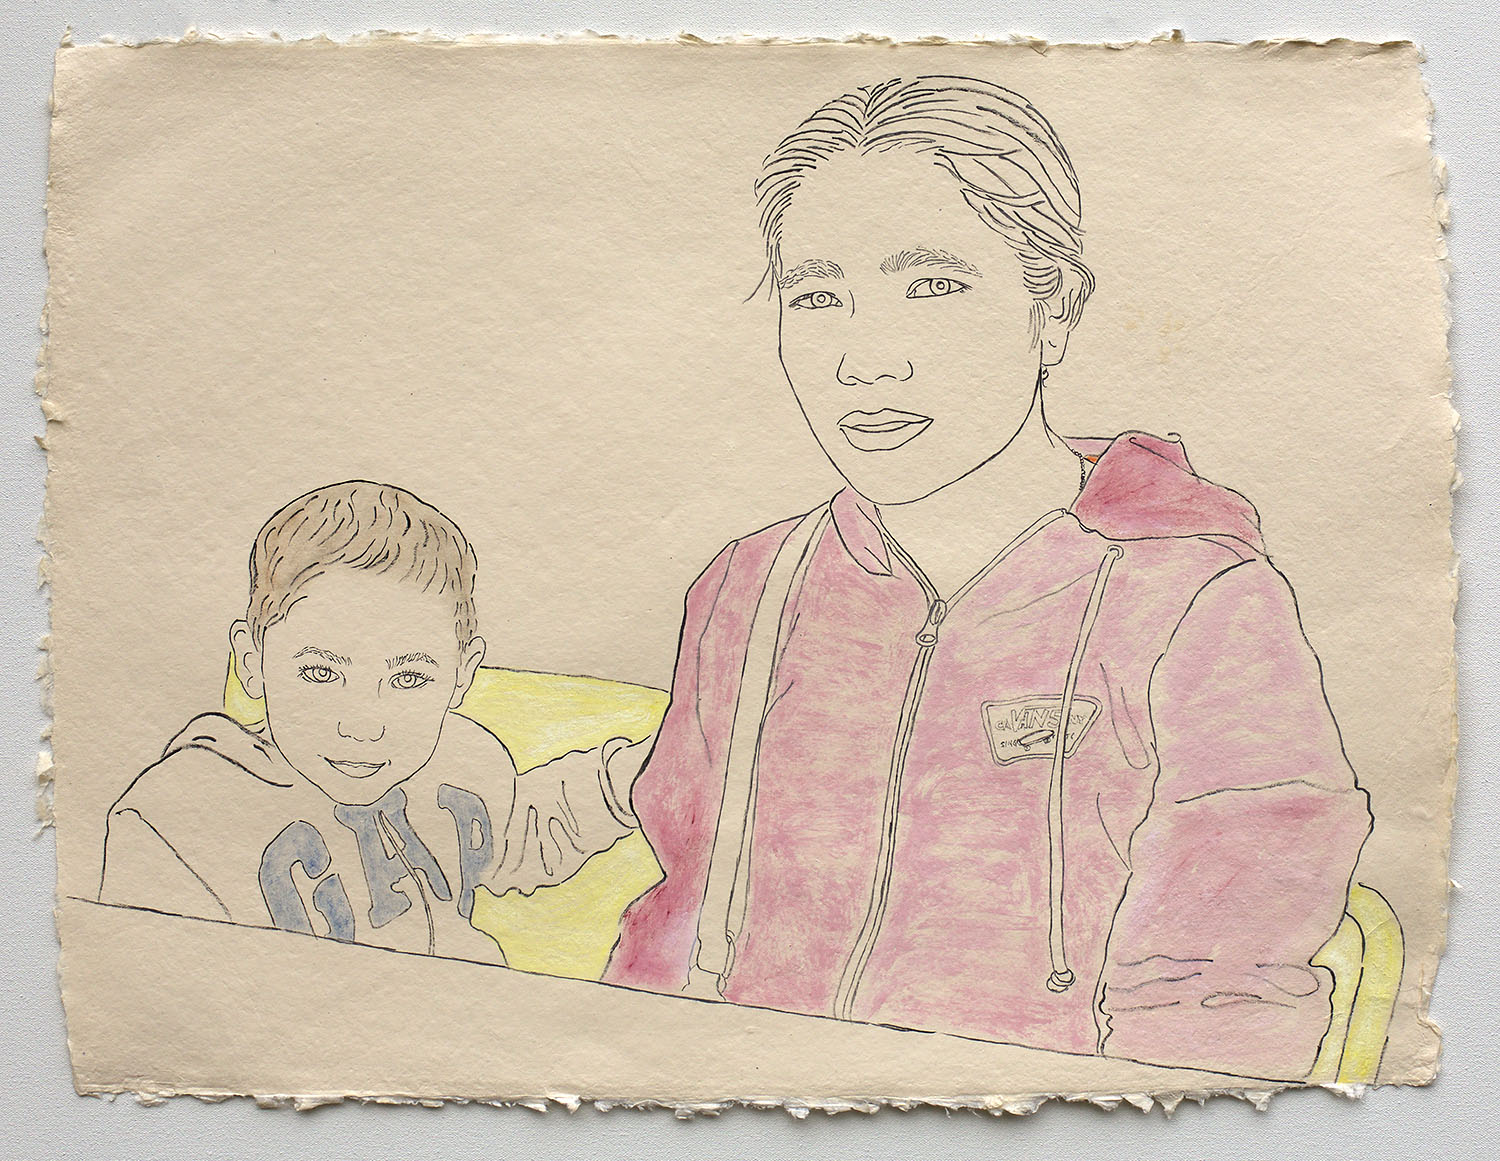   Mother with Son, Applying for United States Citizenship   2019, ink, watercolor, gouache on handmade paper made in India from recycled clothing, 19” x 25”  In the collection of The City of Bellevue Civic Art Collection. 